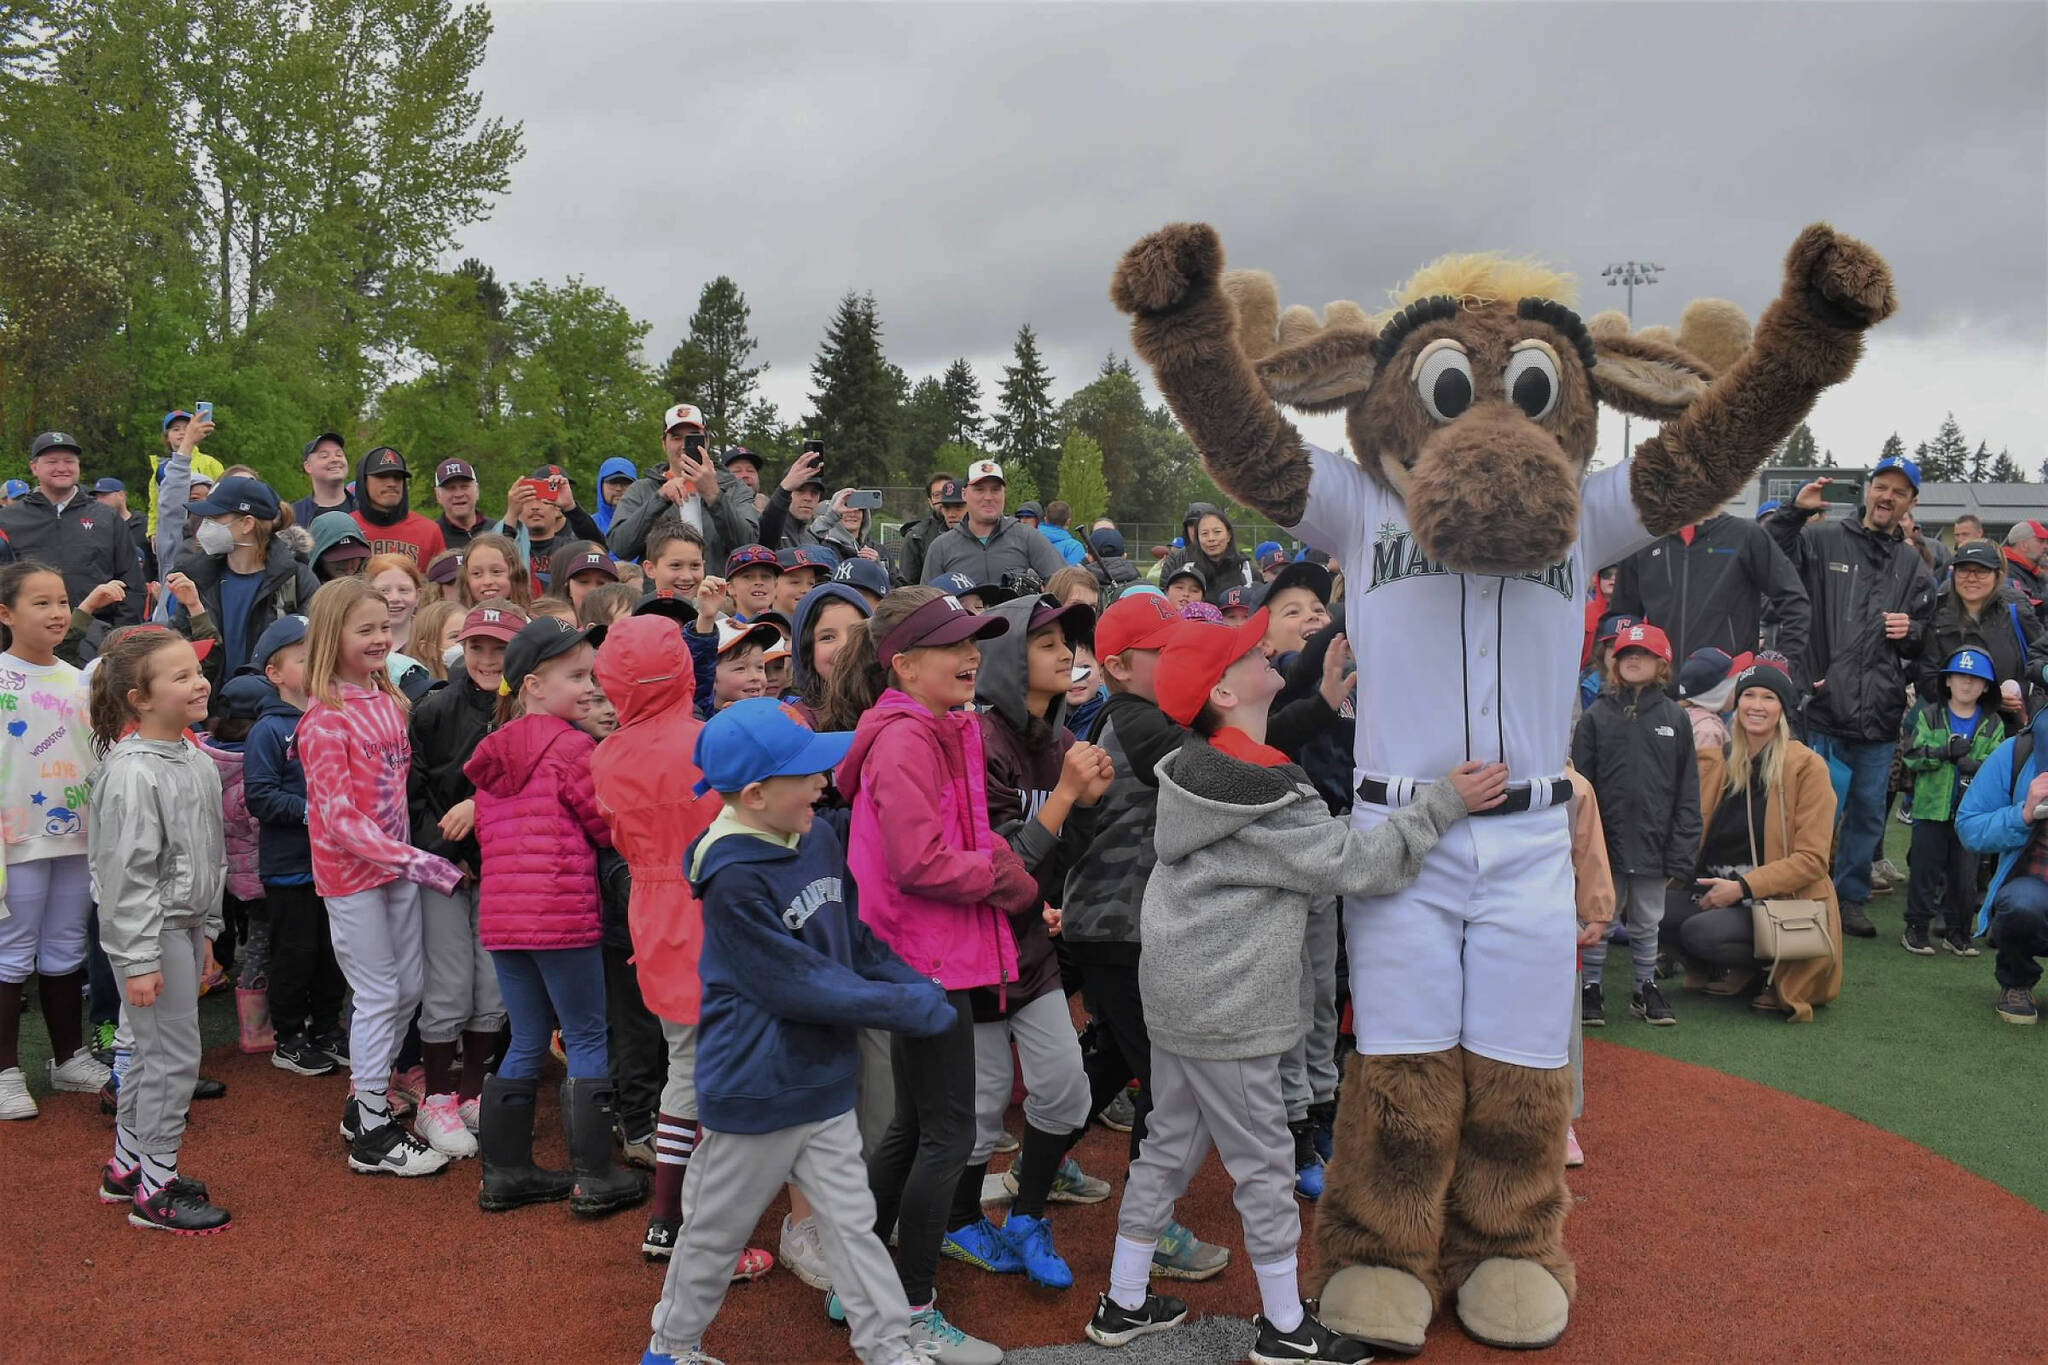 Players gather around the Mariner Moose at the Boys and Girls Club of Mercer Island’s annual Little League Opening Day on May 7 at the South Mercer Fields. Mercer Island resident and Mariners general manager Jerry Dipoto was the guest speaker. There were 50-plus teams, ranging in ages from 3-12, who marched in the parade and were greeted by the Mercer Island High School baseball and fastpitch softball teams. Courtesy of Kym Otte